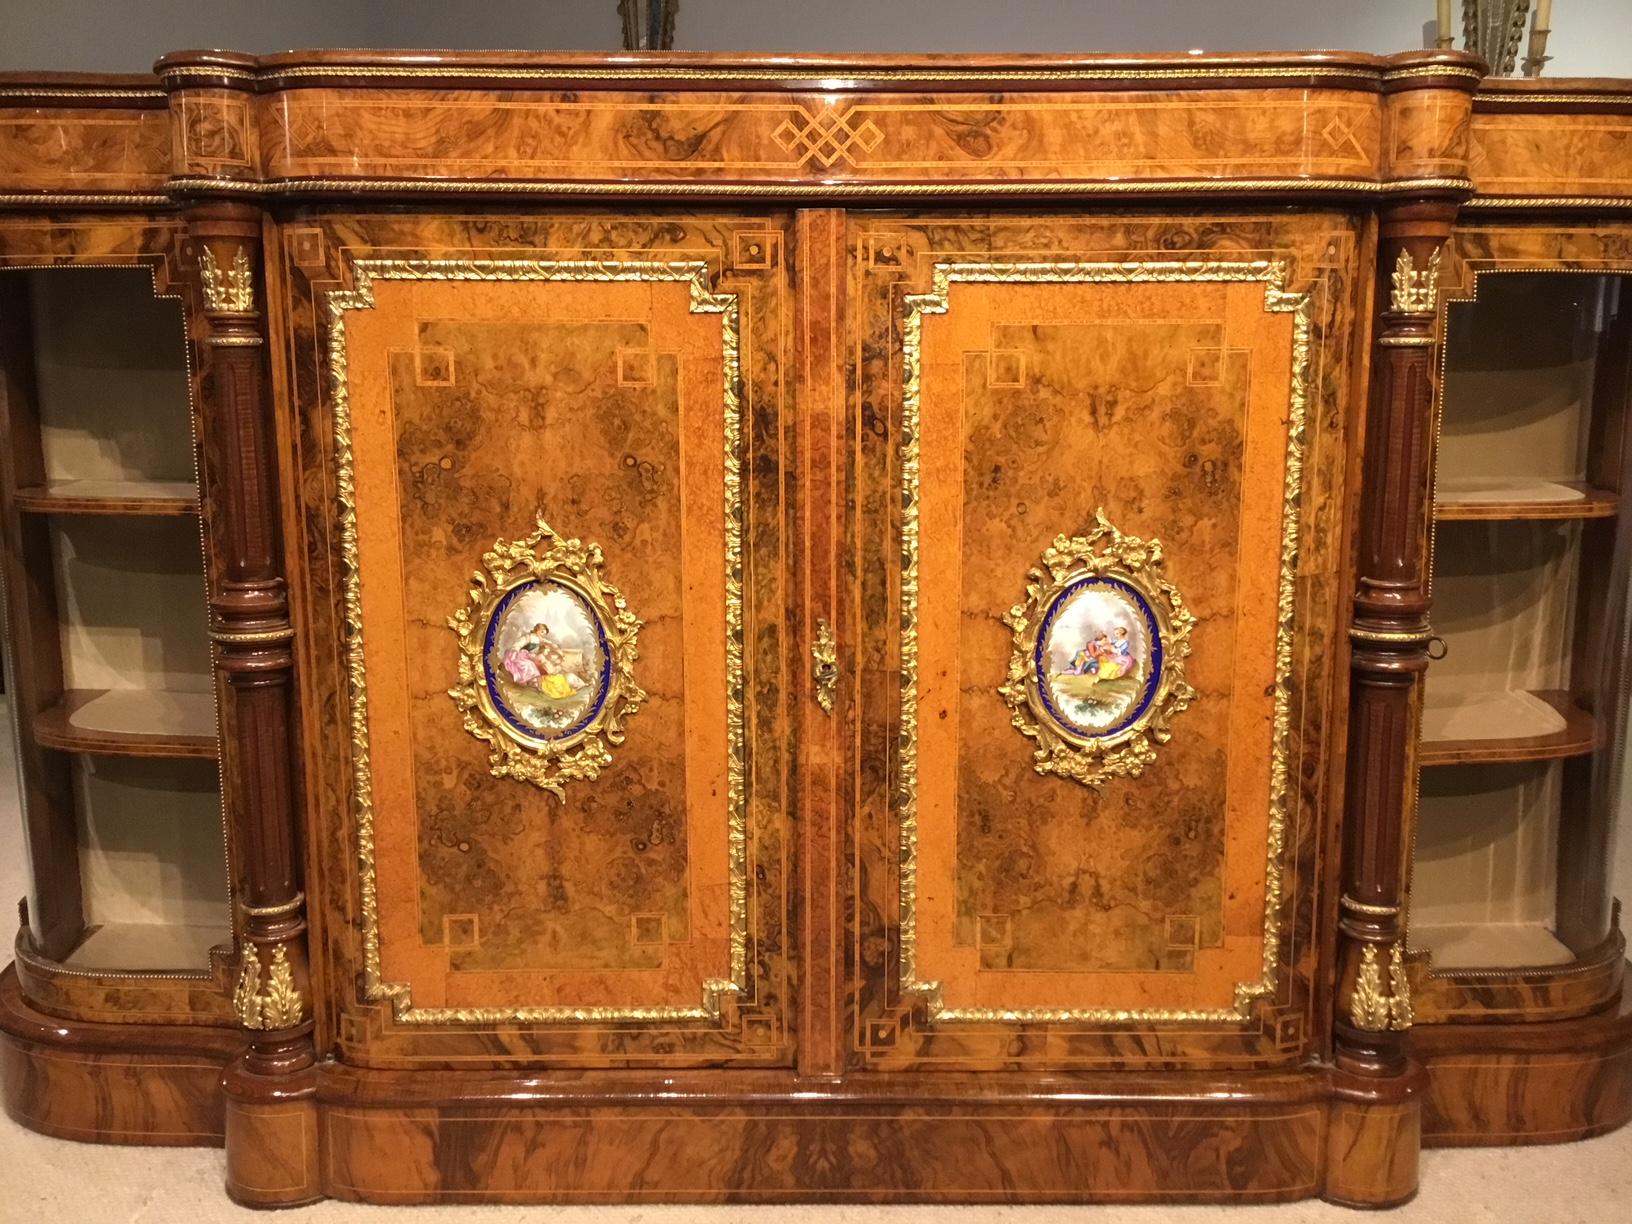 A fine quality burr walnut, amboyna and ormolu mounted Victorian Period credenza. Having a rectangular top with serpentine ends veneered in beautifully figured burr walnut with kingwood banding and stained sycamore roundels. The front with a burr